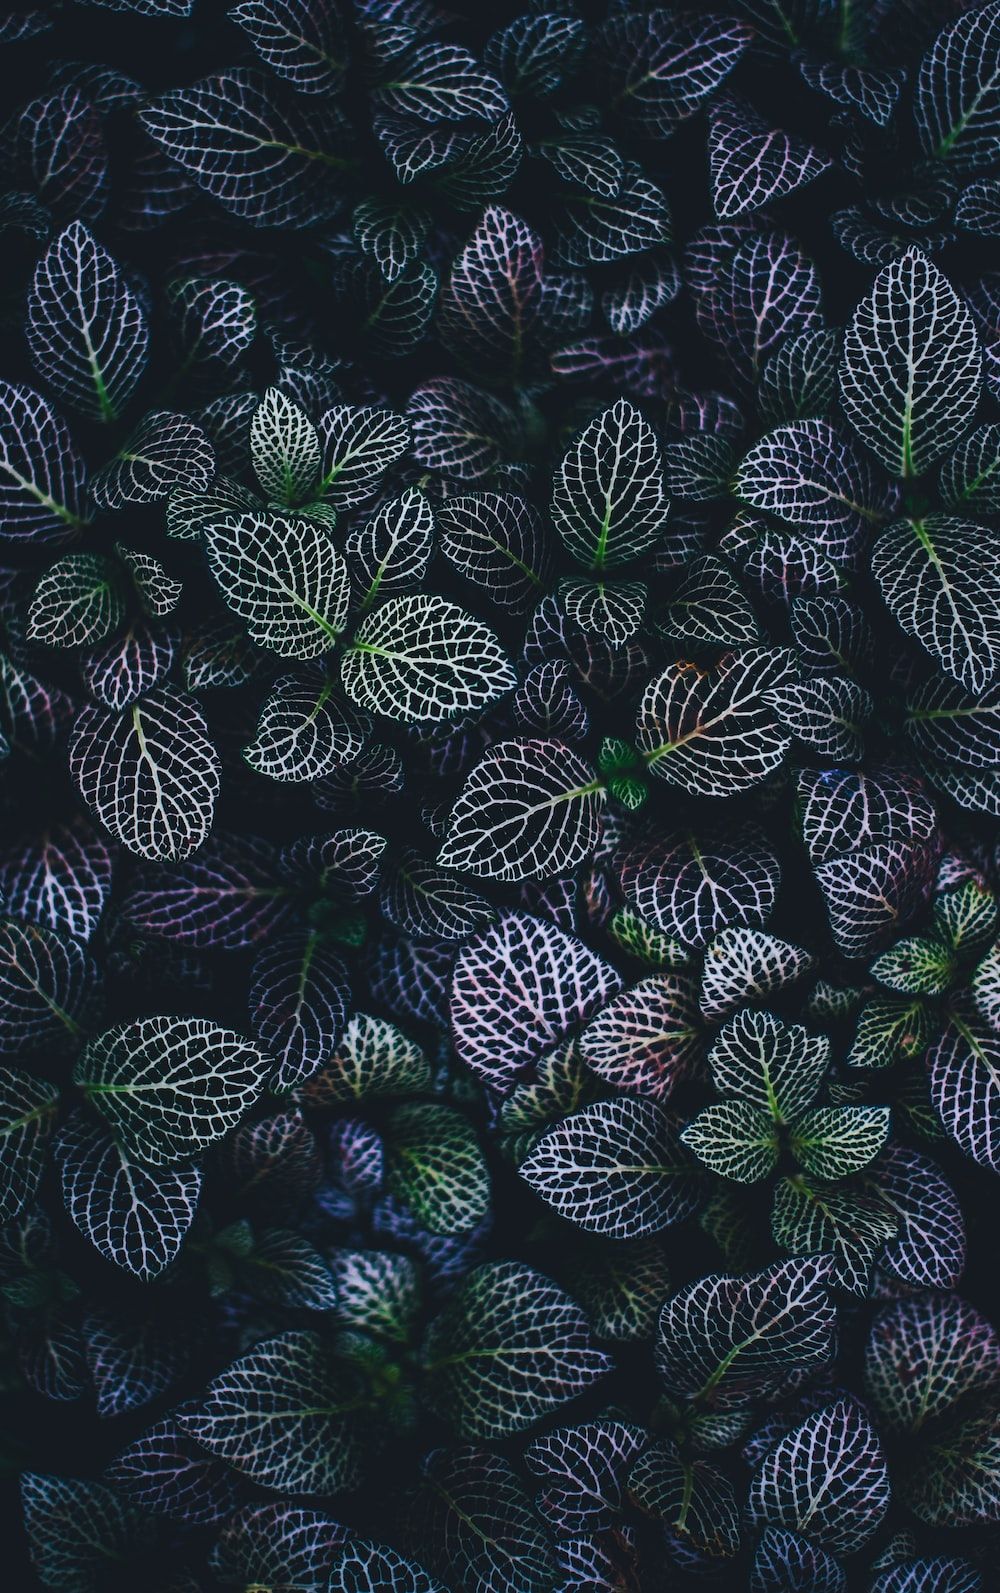 A close up of some plants in the dark - Dark green, witch